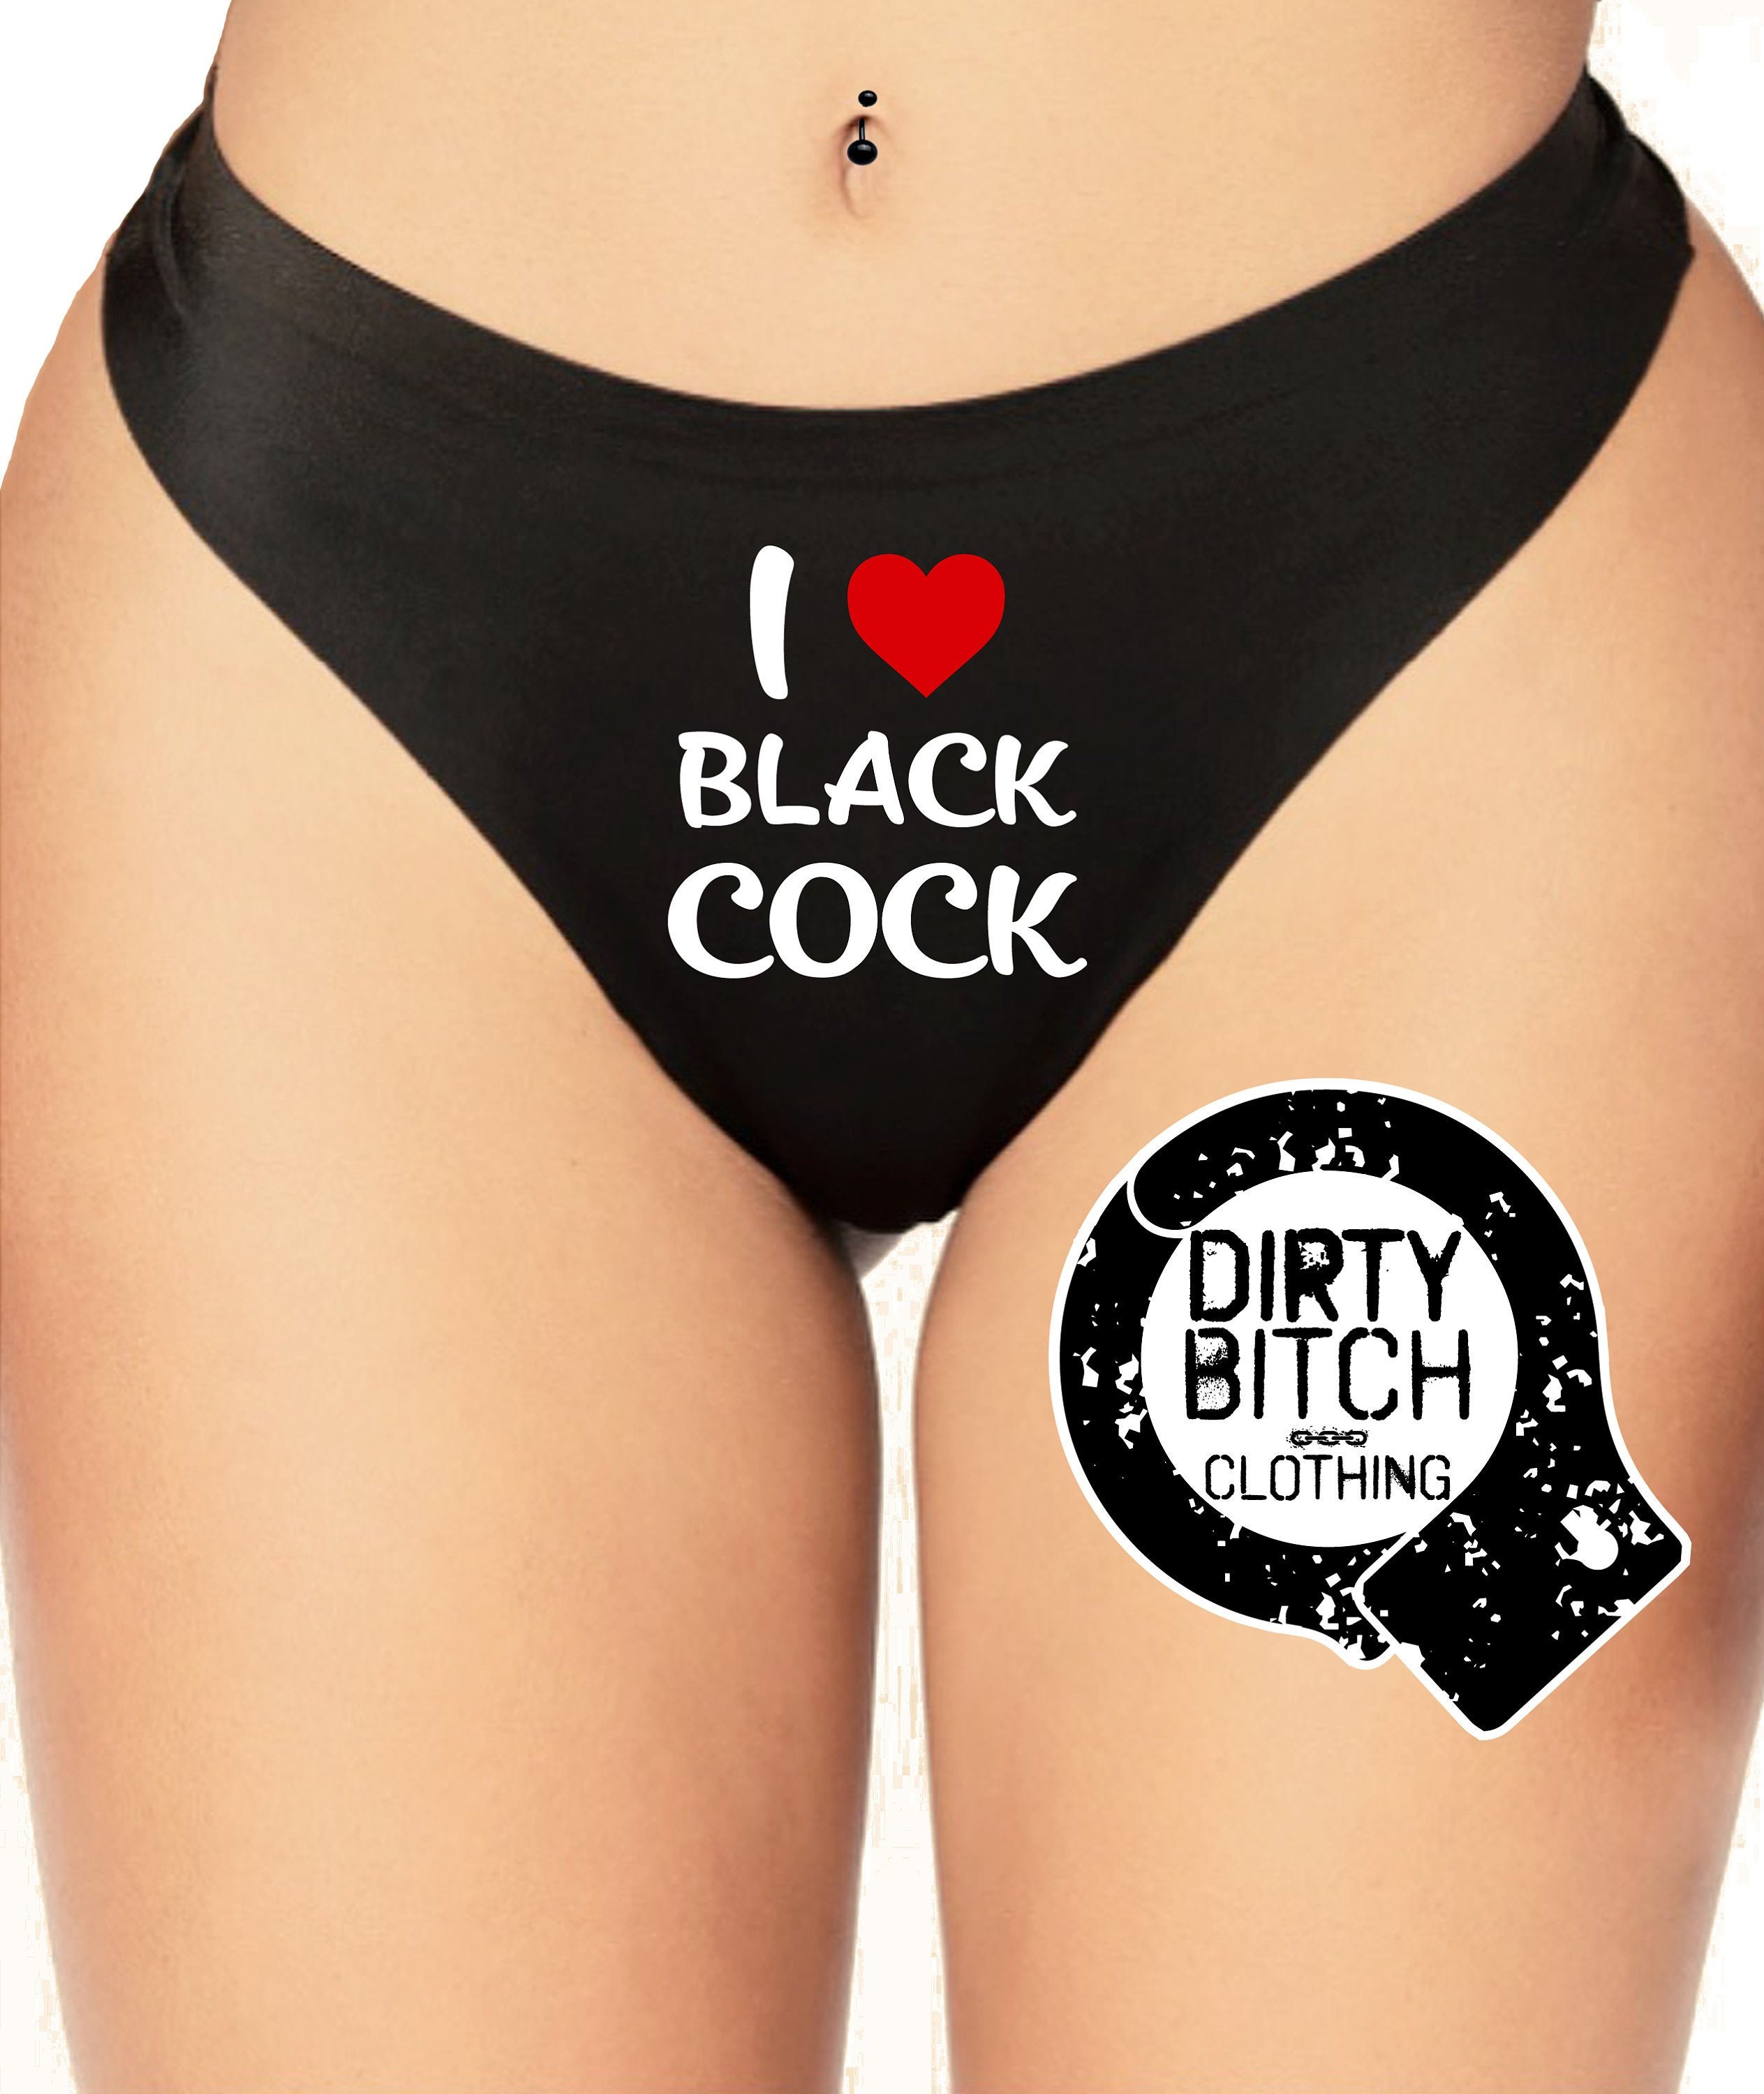 bryan hefley recommends we love black cock pic